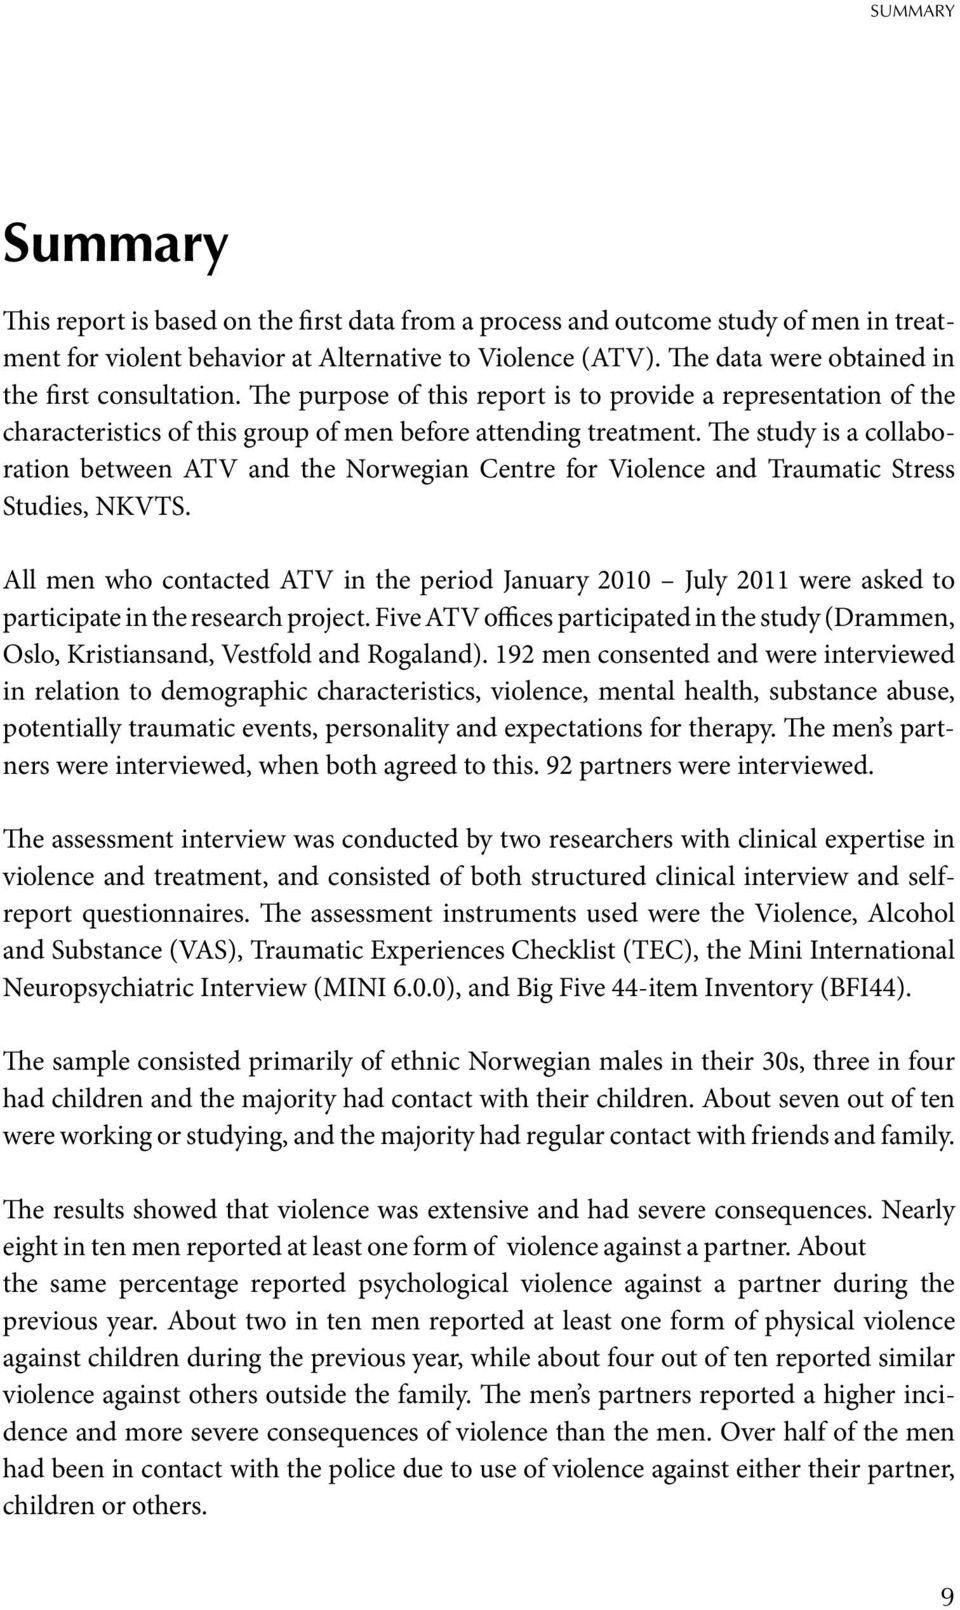 The study is a collaboration between ATV and the Norwegian Centre for Violence and Traumatic Stress Studies, NKVTS.